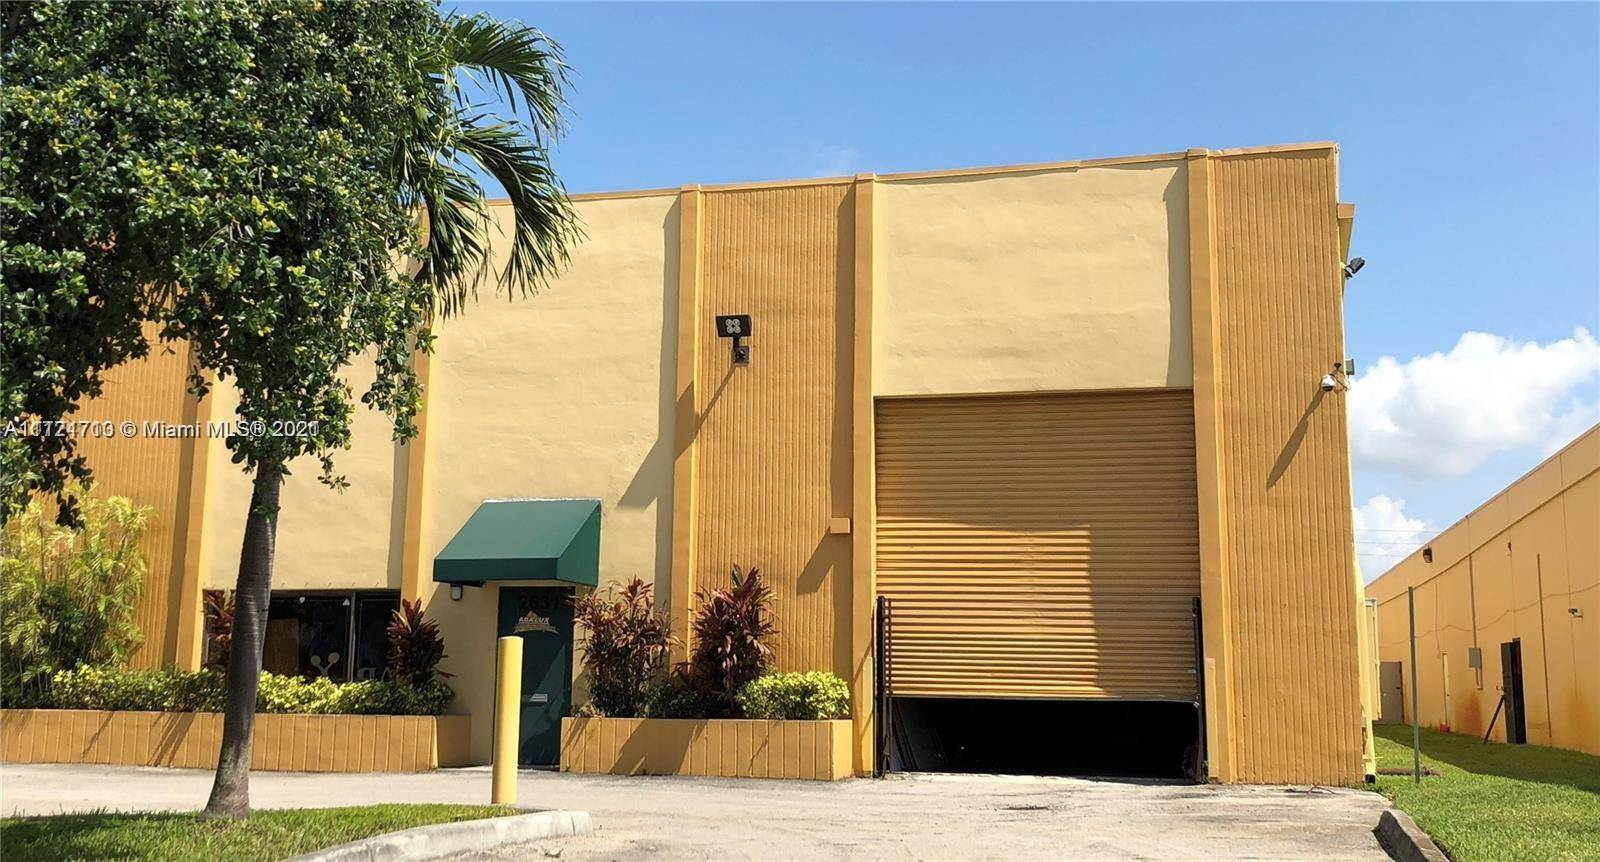 5, 000 SF Footprint Hialeah Warehouse Bay 50' wide x 100' deep with additional 2nd floor approximately 2, 175 SF warehouse mezzanine for a total of nearly 8, 000 SF.